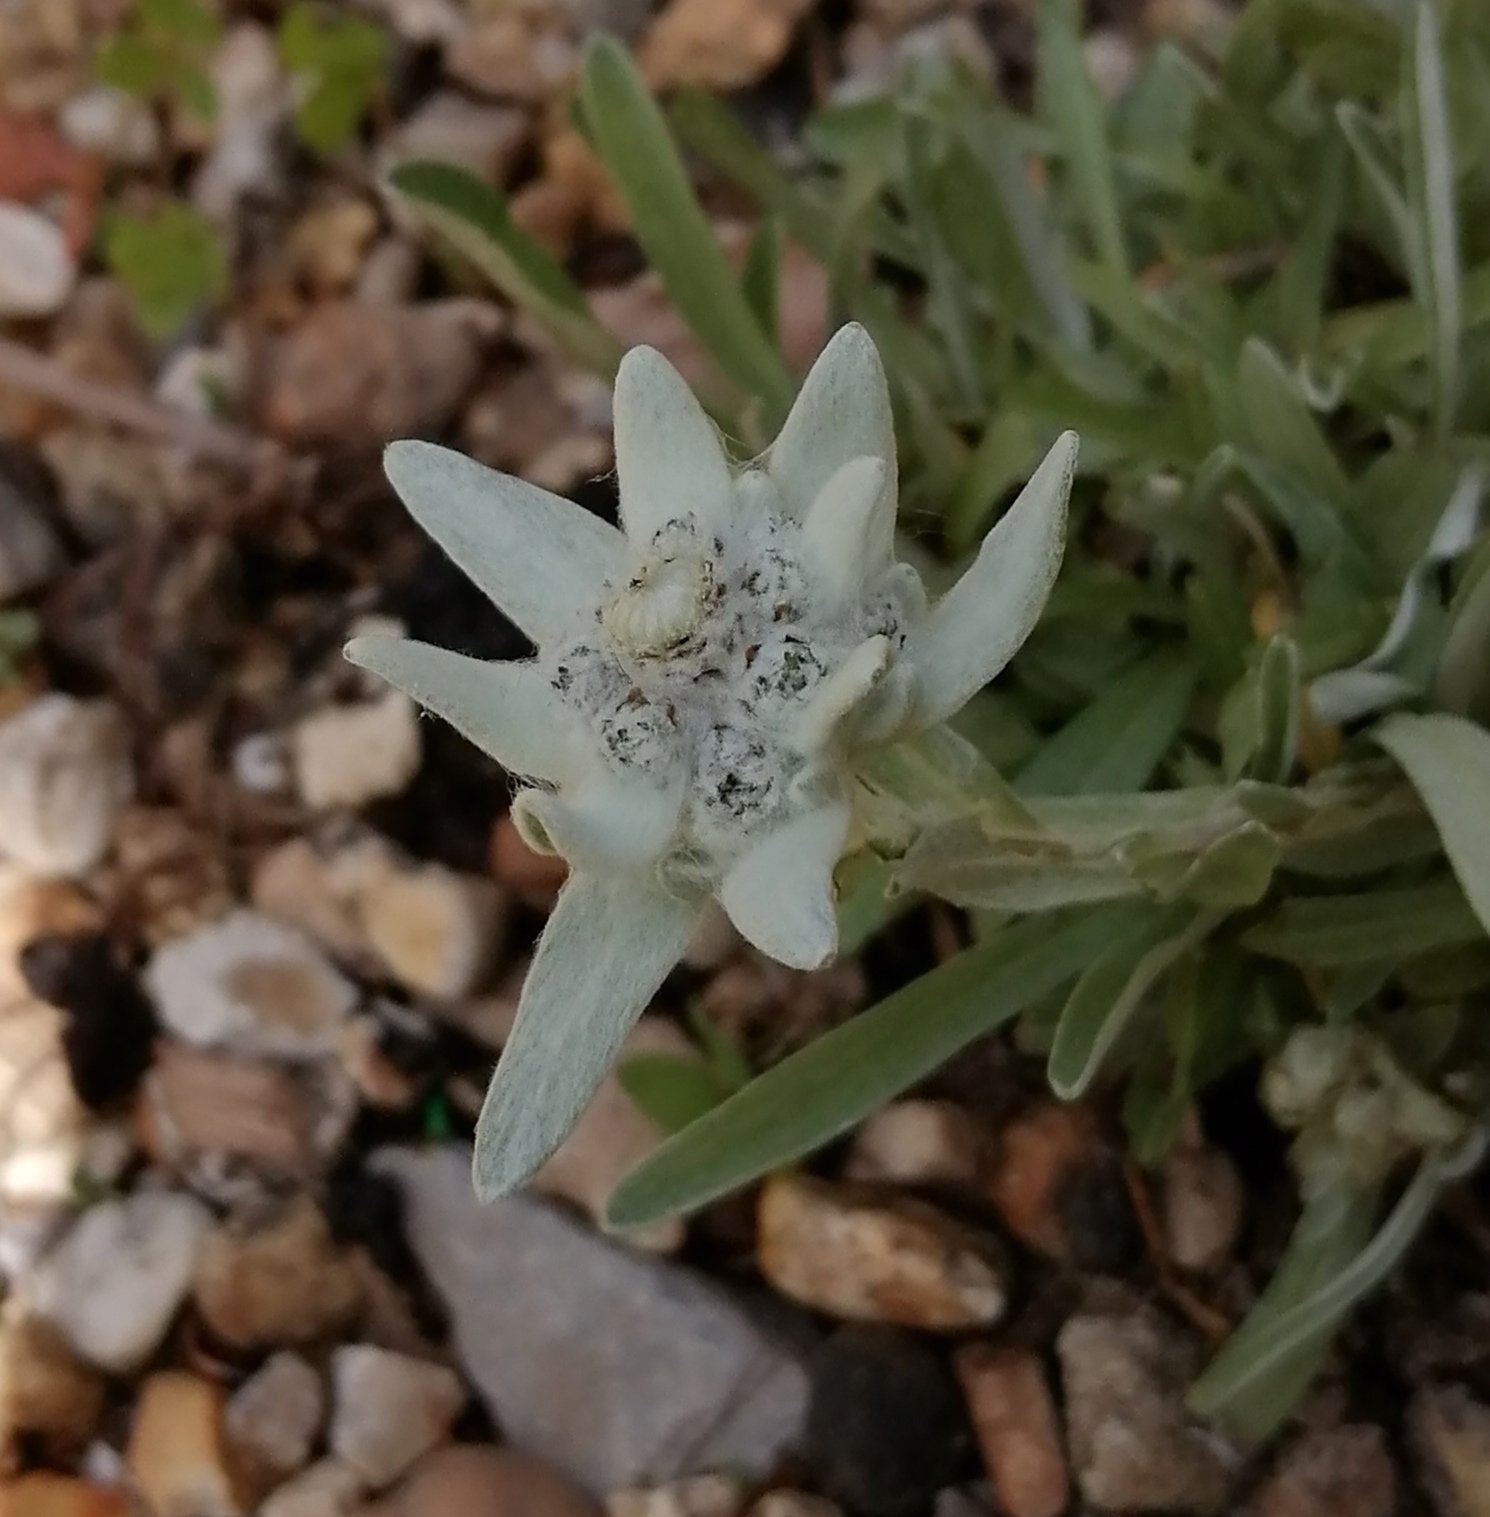 Edelweiss ~ I open to all that is